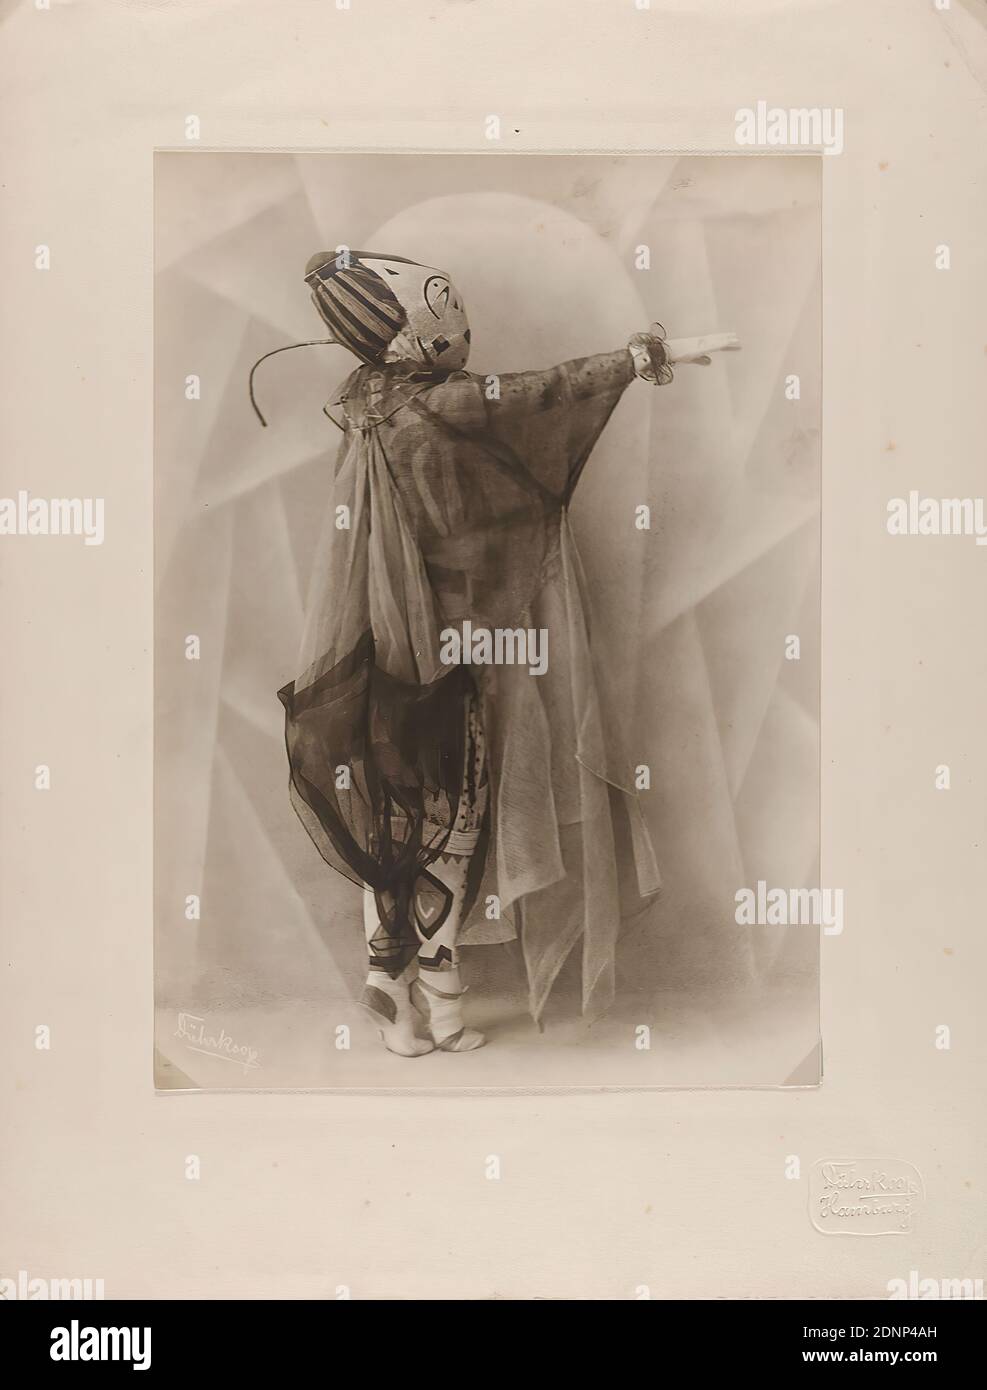 Minya Diez-Dührkoop, Dance Mask Sie by Lavinia Schulz, silver gelatin paper, black and white positive process, image size: height: 22,40 cm; width: 16,00 cm, signed: recto u. li.: handwriting copied into the image Dührkoop, inscribed: verso and handwritten in lead on the cardboard, old and new inv. no, repro no.; verso and handwritten in lead: old inventory no, dimensions, repro no, dry stamp: recto and right on the cardboard: Dührkoop, Hamburg, theater photography, dancing Stock Photo